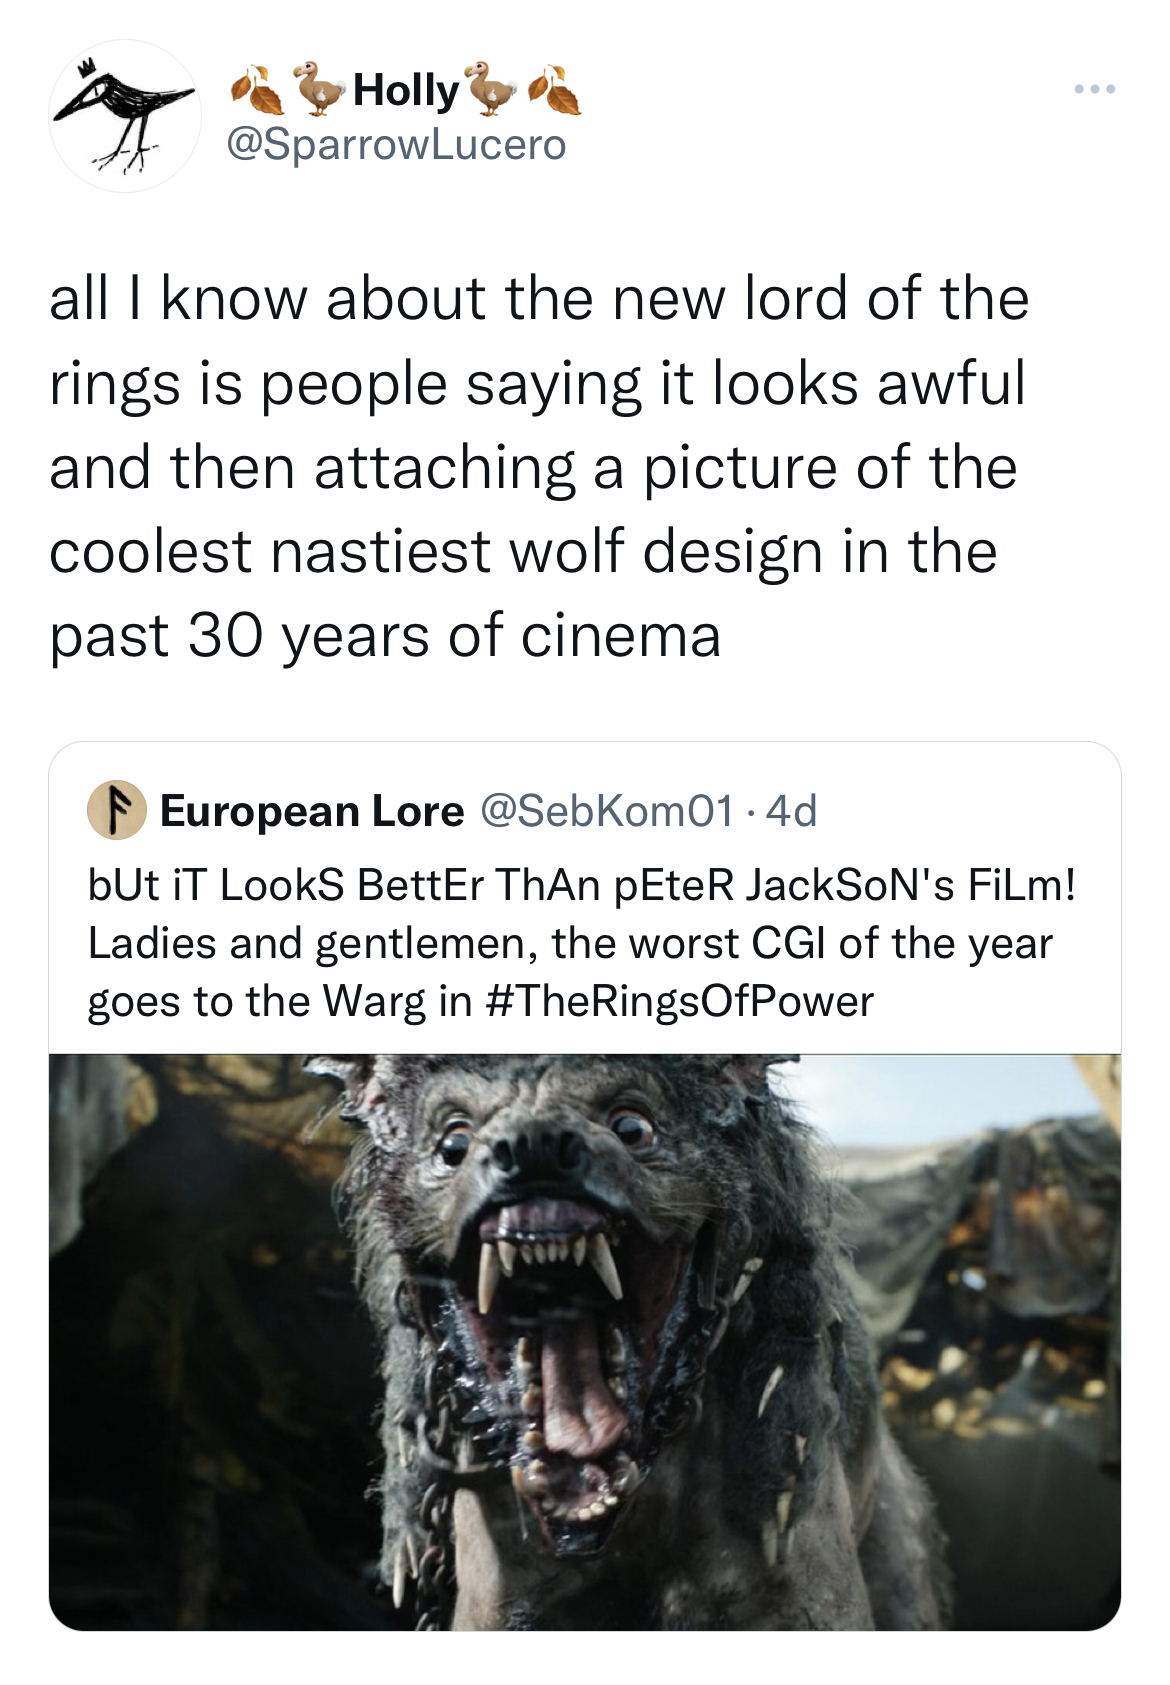 Funny and Fresh Tweets - dog - Holly all I know about the new lord of the rings is people saying it looks awful and then attaching a picture of the coolest nastiest wolf design in the past 30 years of cinema www European Lore but it Looks BettEr ThAn pEte